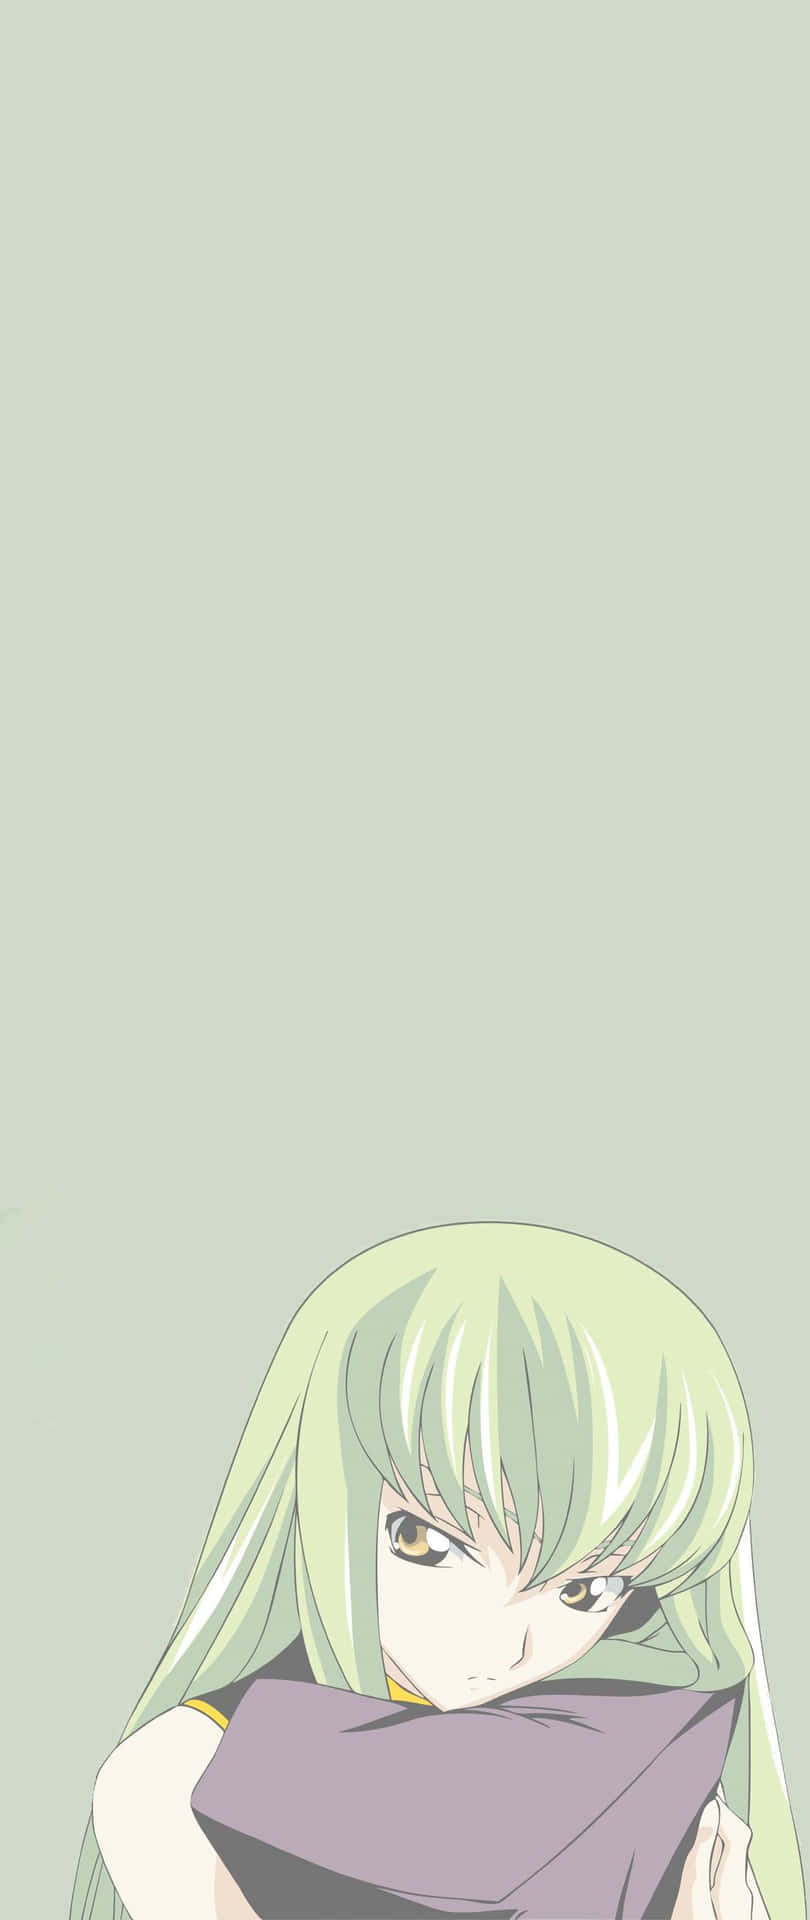 Lelouch  IPhone Background by abdullahbb on DeviantArt